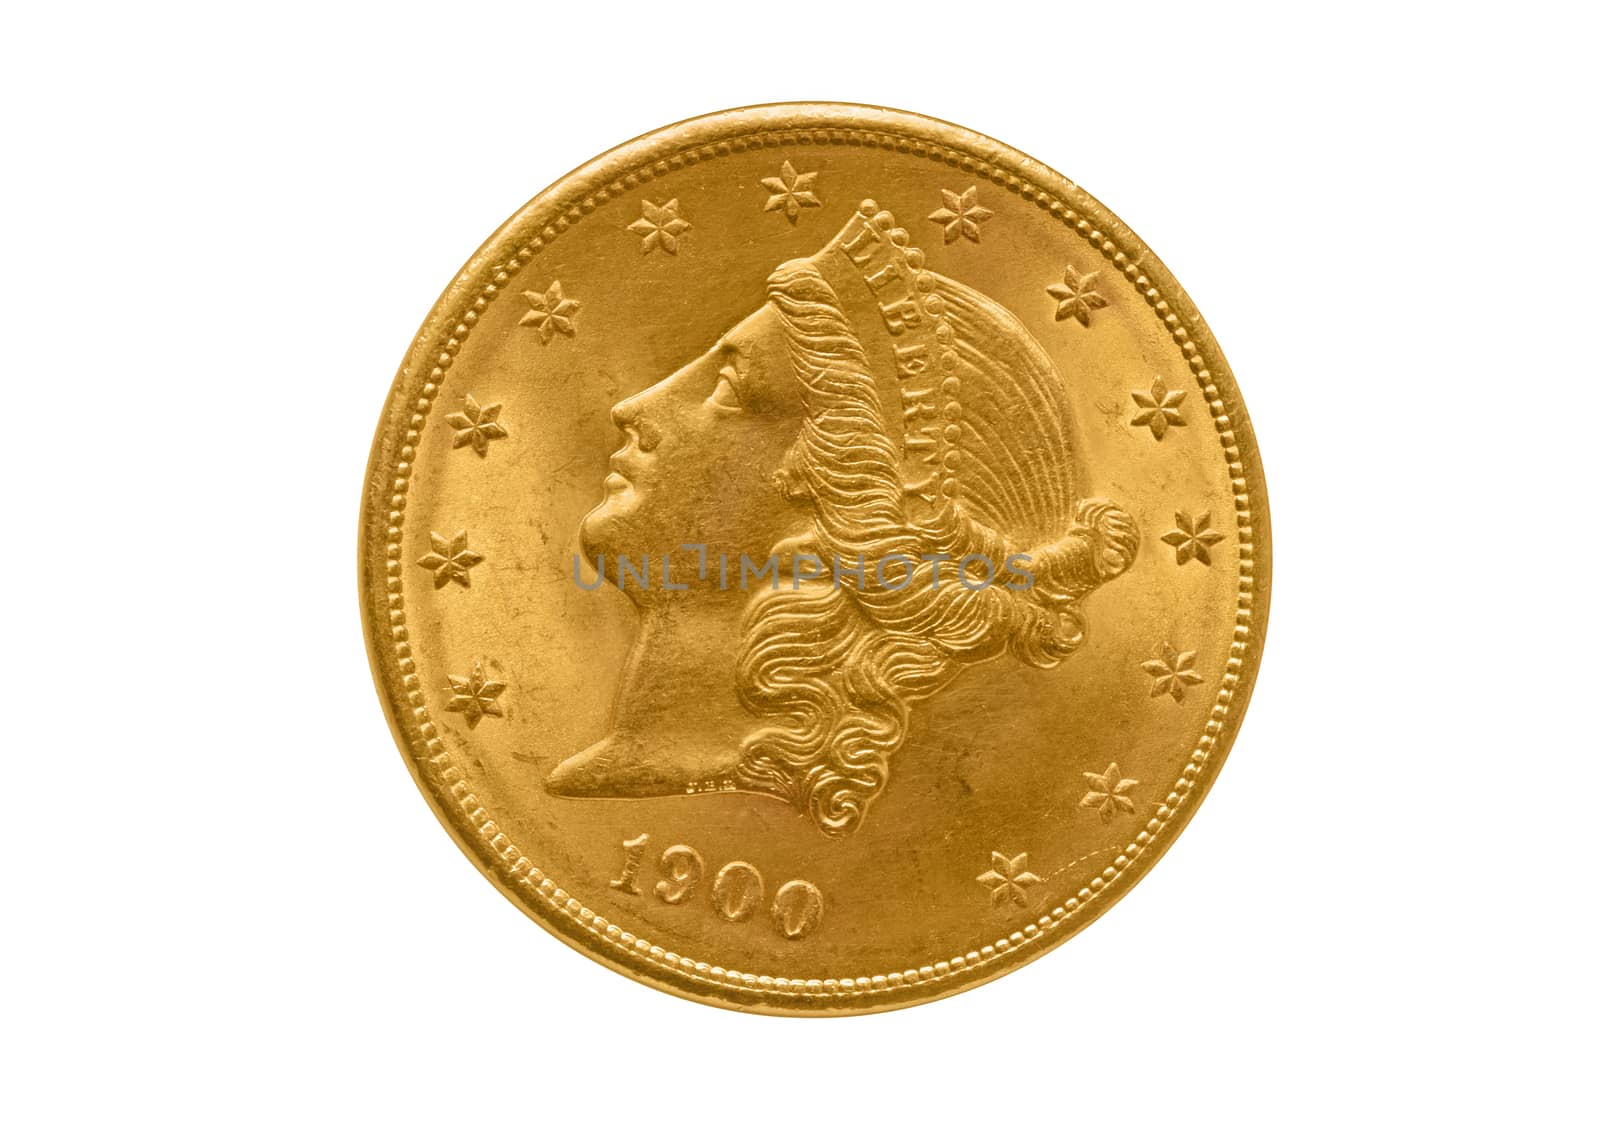 20 Liberty golden dollar coin. Isolated on white background